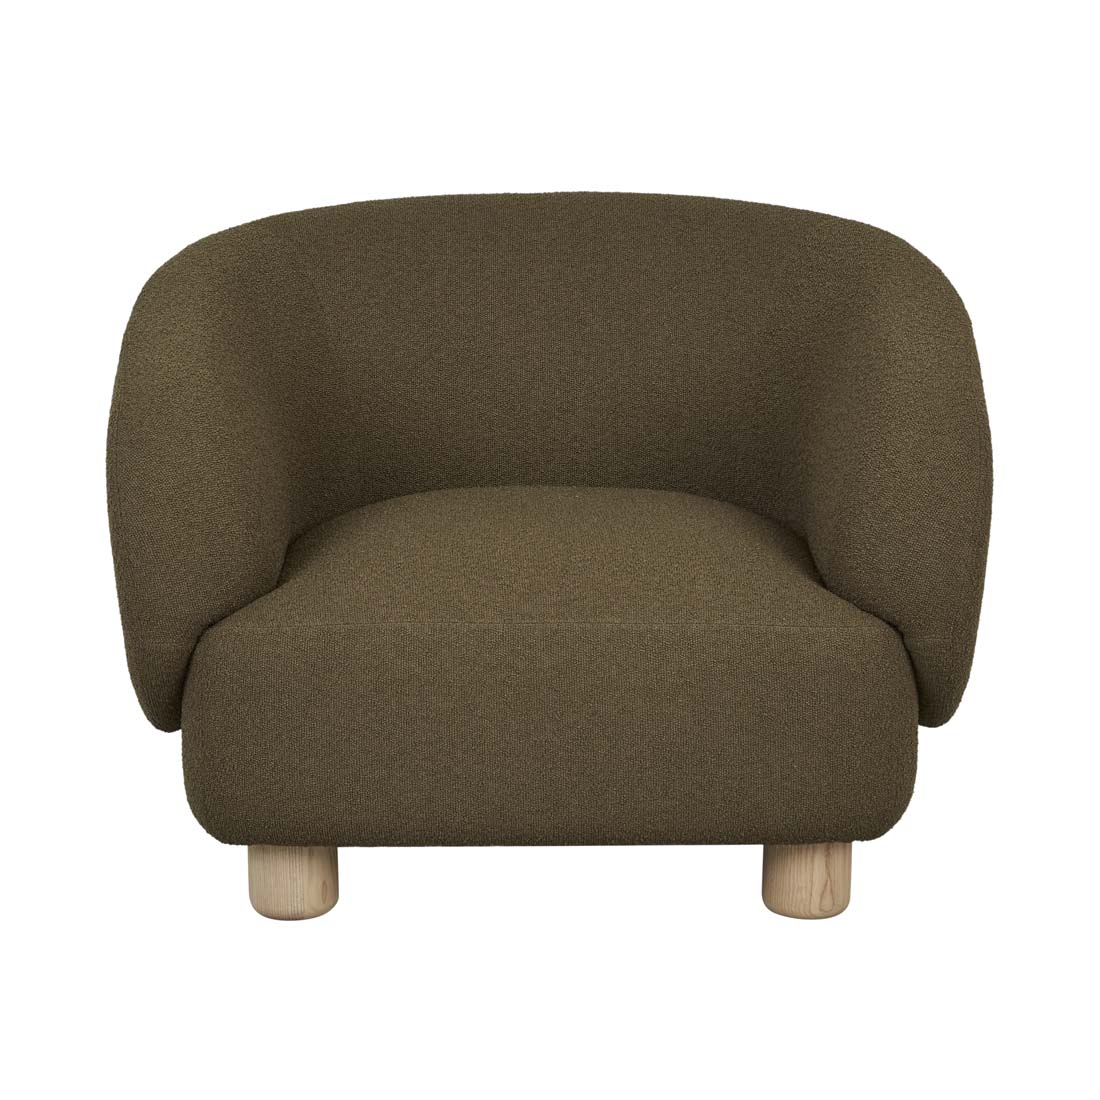 Flo Occasional Chair